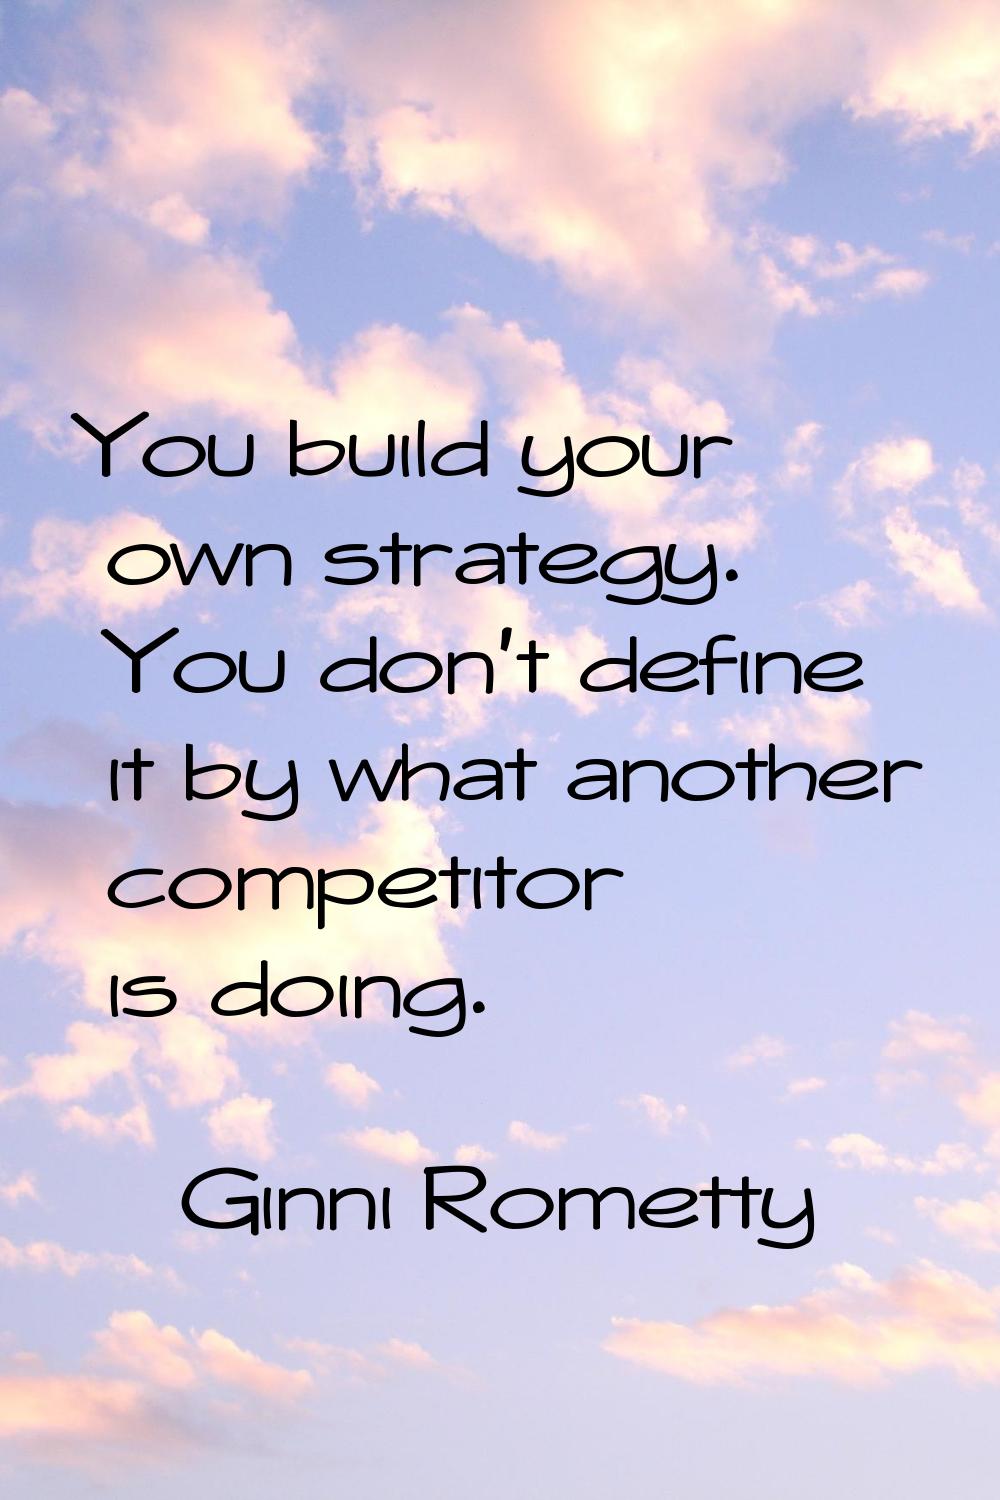 You build your own strategy. You don't define it by what another competitor is doing.